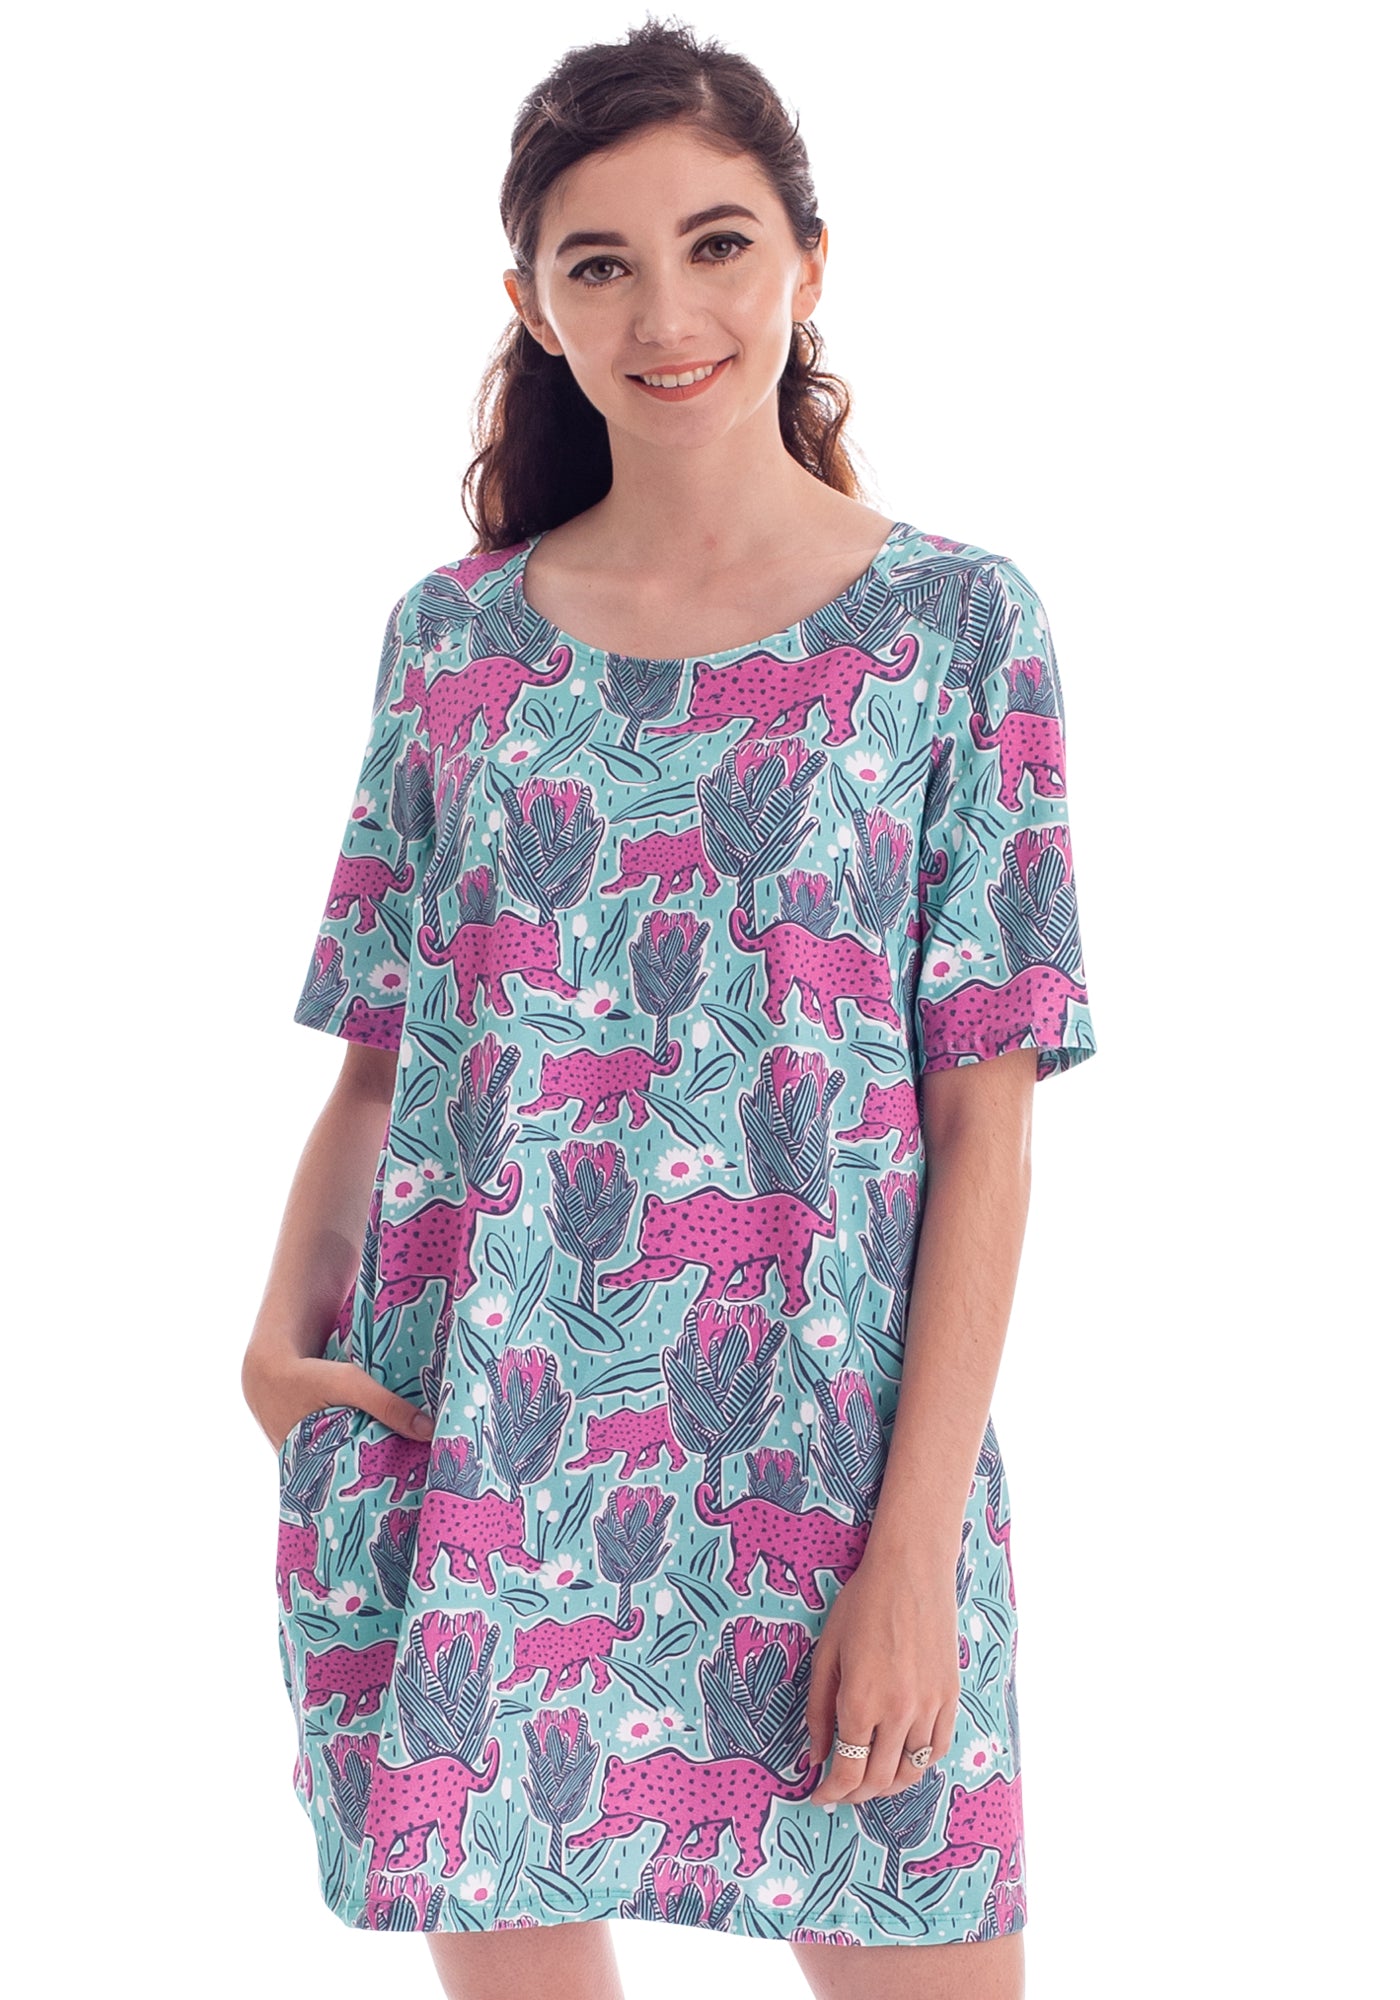 Dark haired model in mint green and pink pocket tunic with a print of protea flowers and jaguars